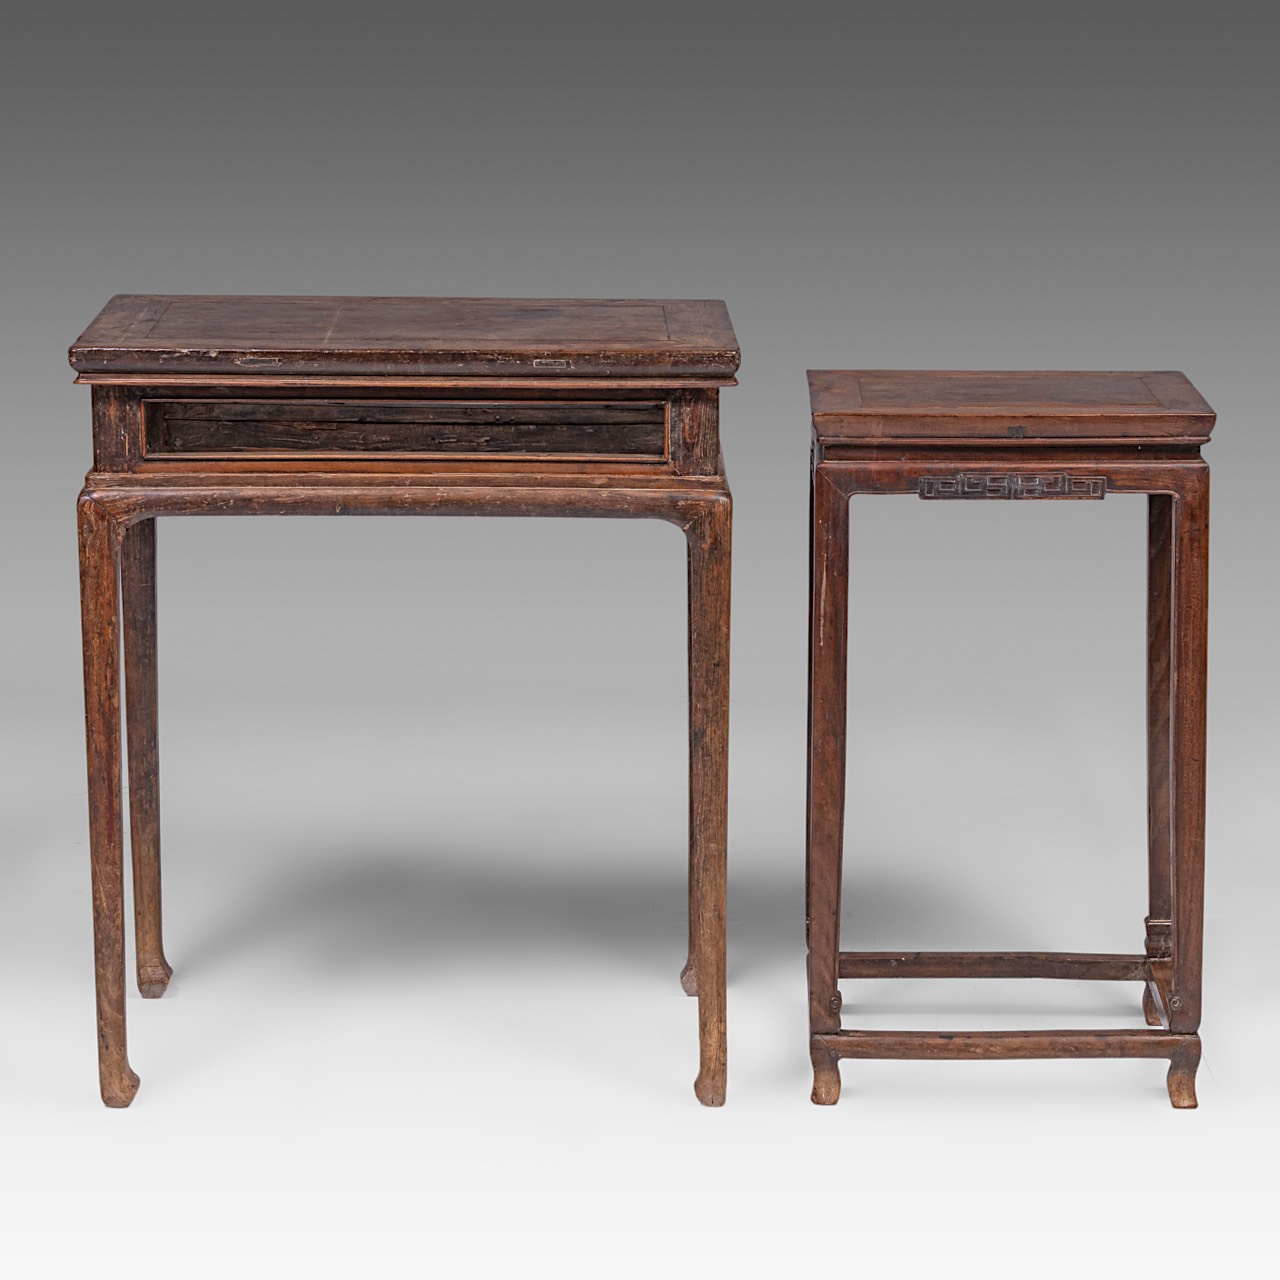 Two Chinese hardwood side tables, mid - late Qing dynasty, largest H 82 - 69 x 42 cm - Image 4 of 7